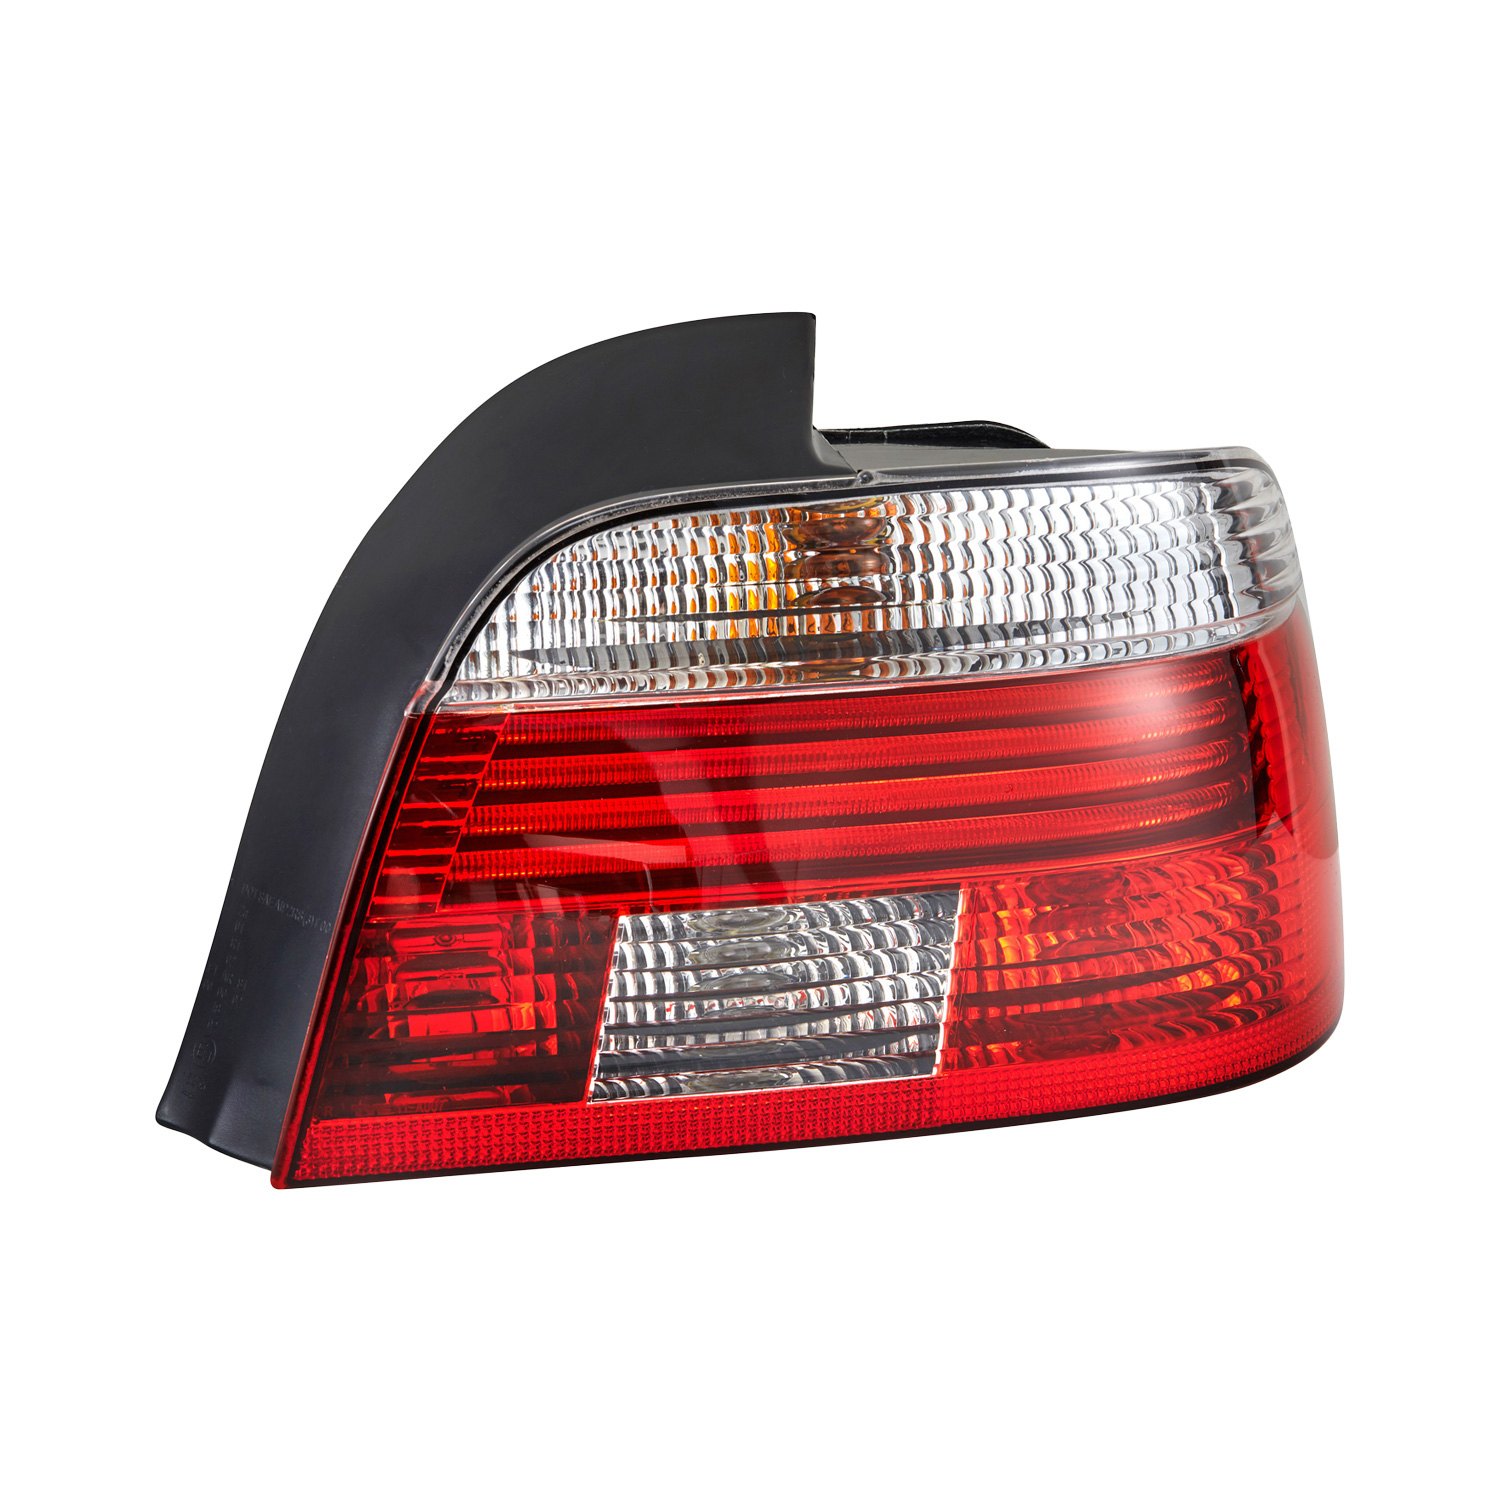 TYC 11-5851-01-1 Chevrolet Right Replacement Tail Lamp 